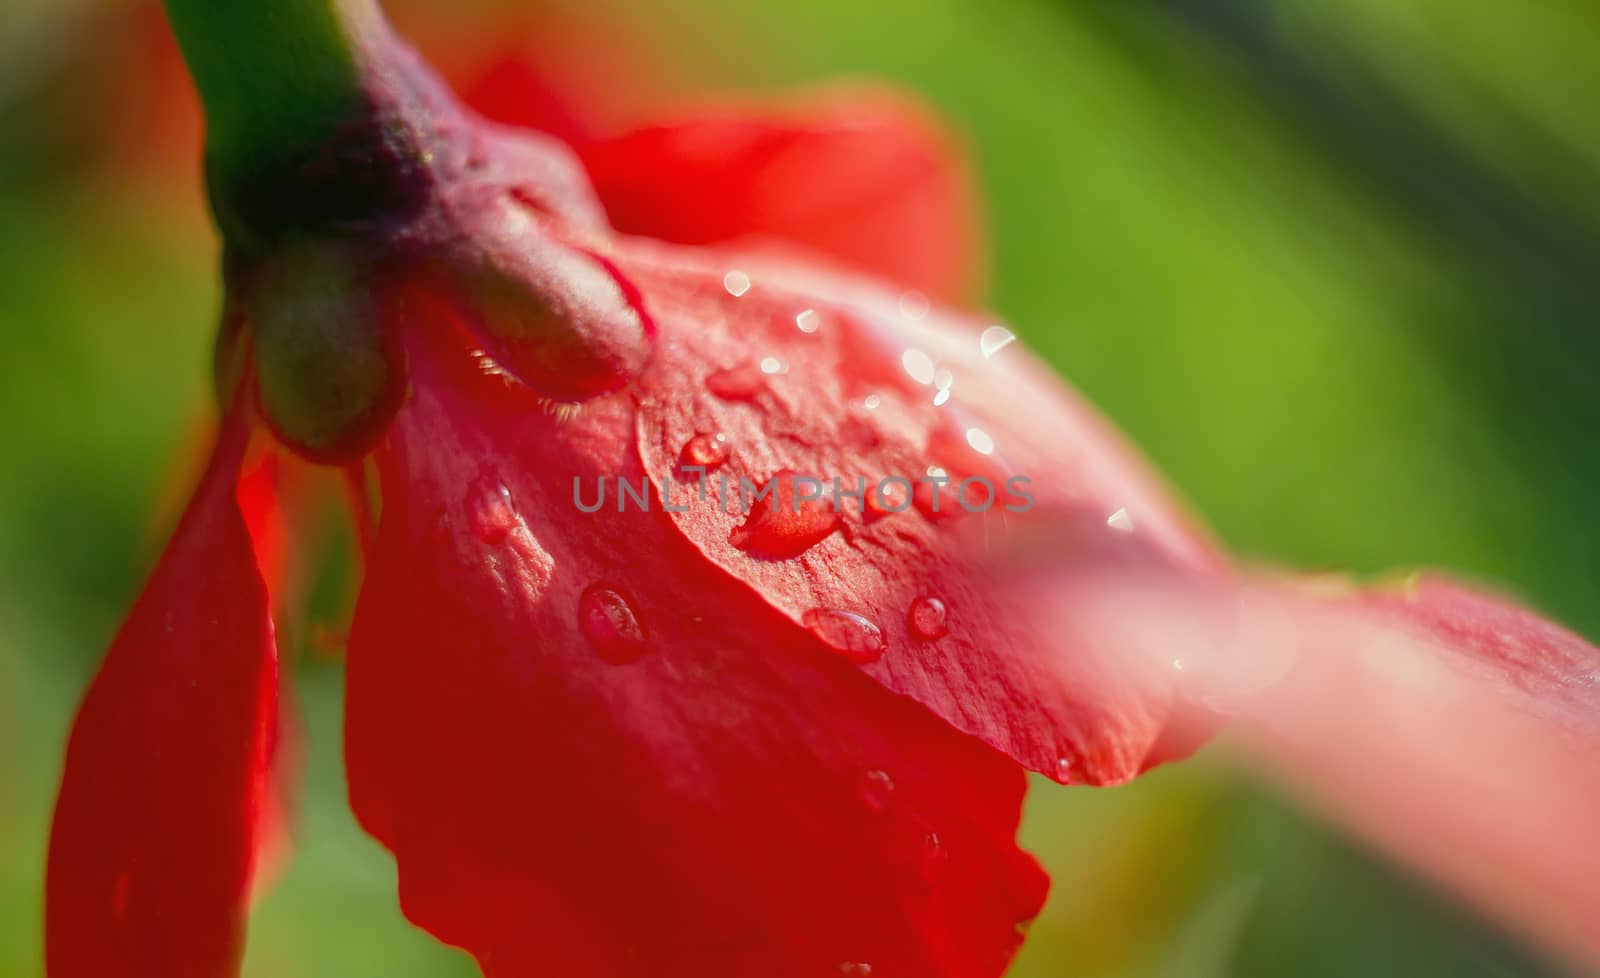 red flower close-up on a green background with drops  by KoliadzynskaIryna